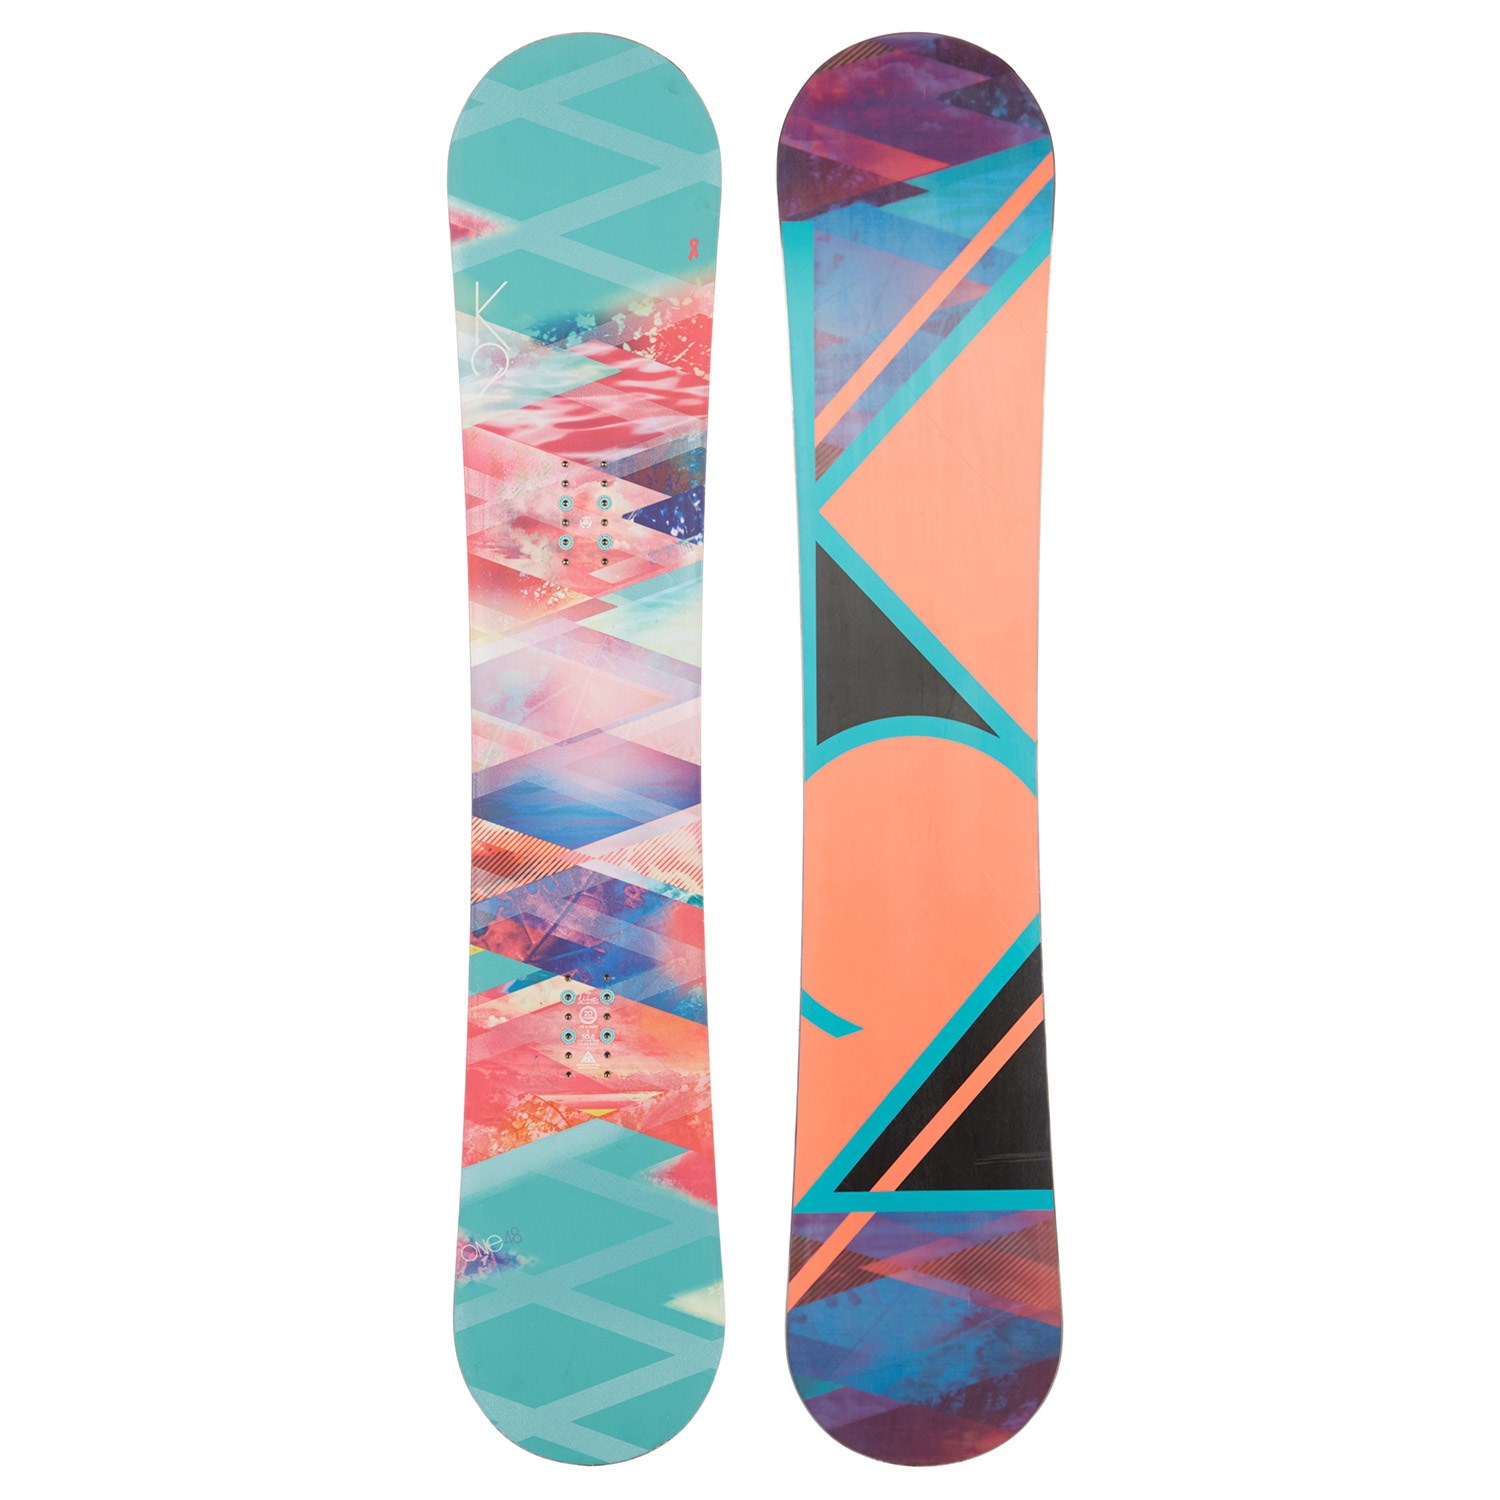 K2 Eco Lite Snowboard Used Womens 2014 Evo Outlet 5247